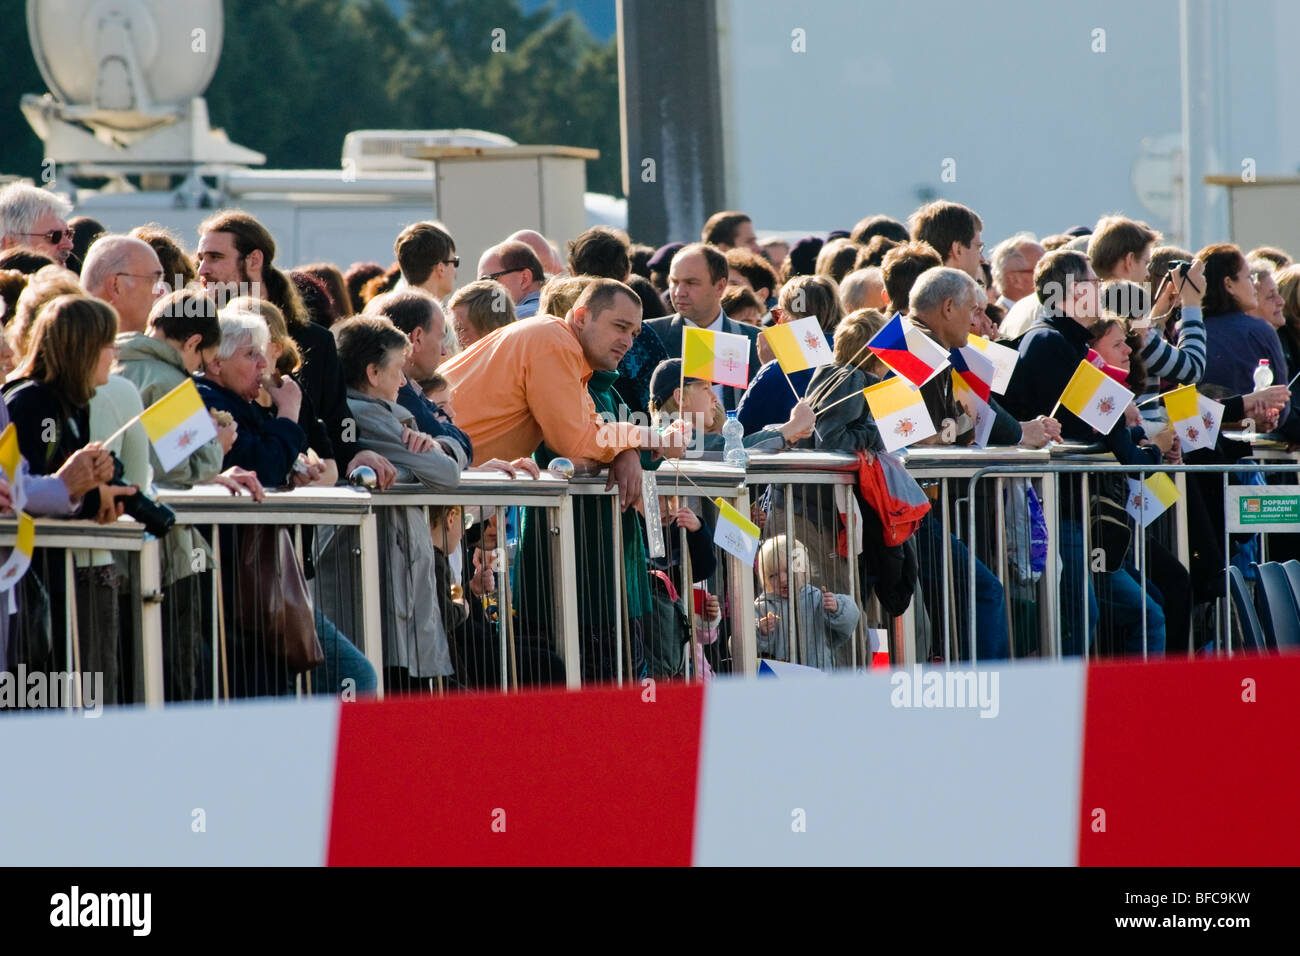 Czech catholic followers waiting for the Pope Benedict XVI at the Prague Airport, Czech Republic, 26 September 2009. Stock Photo